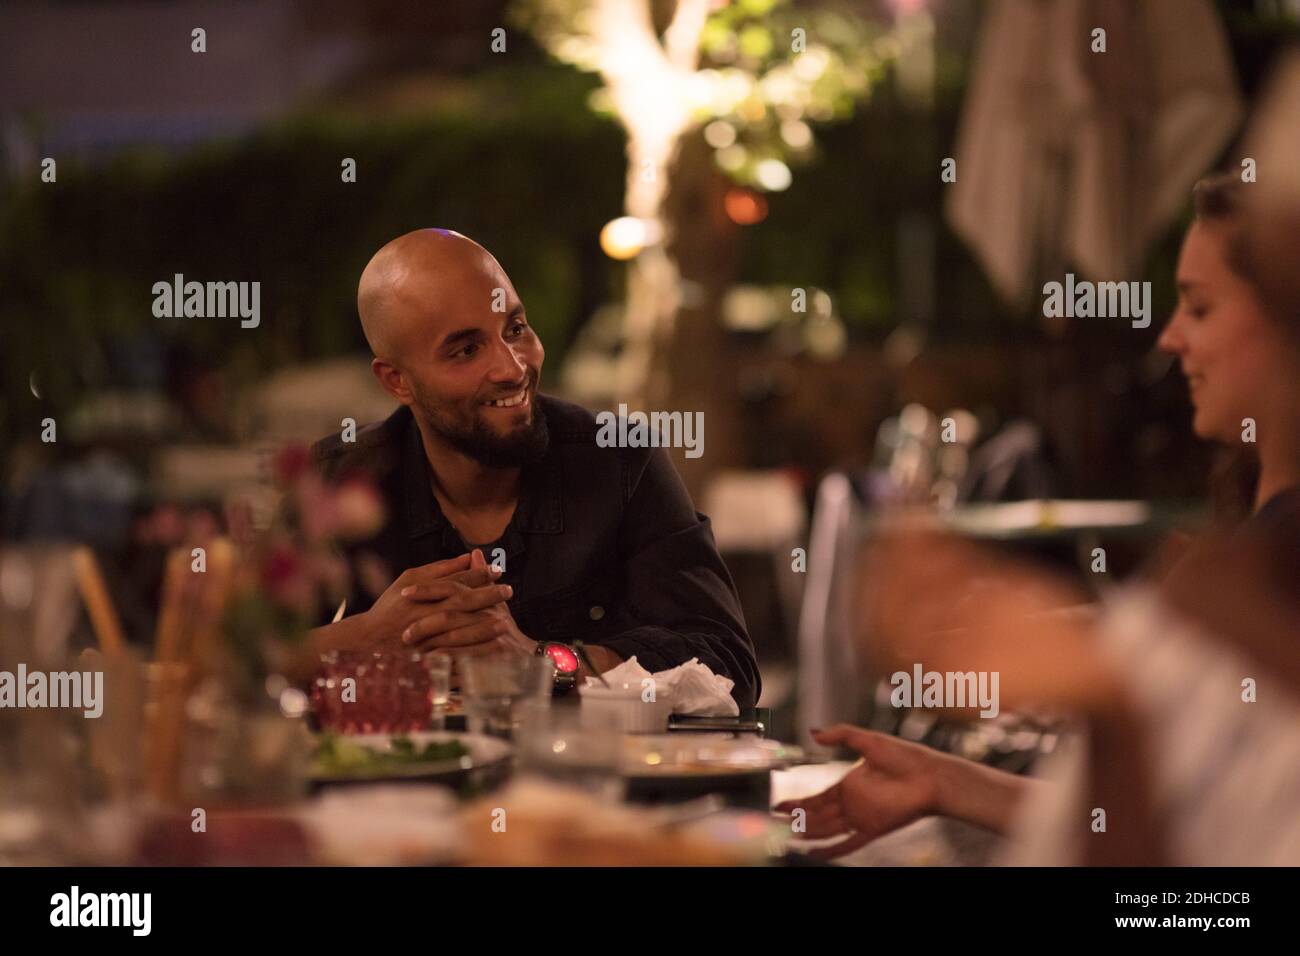 Smiling young man with shaved head looking at female friend while sitting at table during dinner party Stock Photo